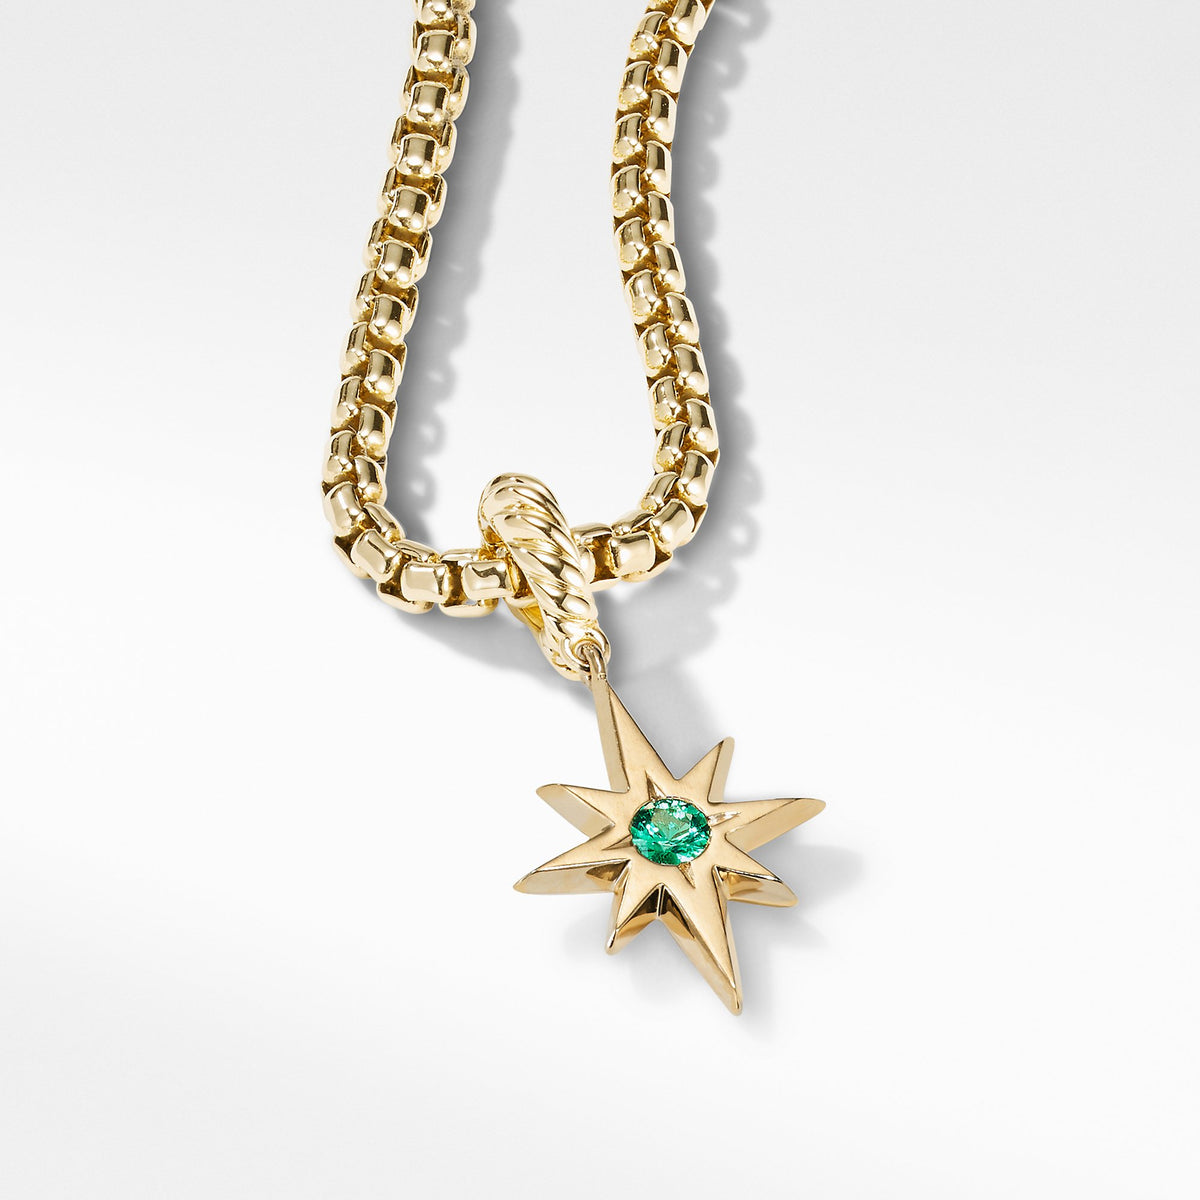 Cable Collectibles® North Star Birthstone Charm in 18K Yellow Gold with Emerald